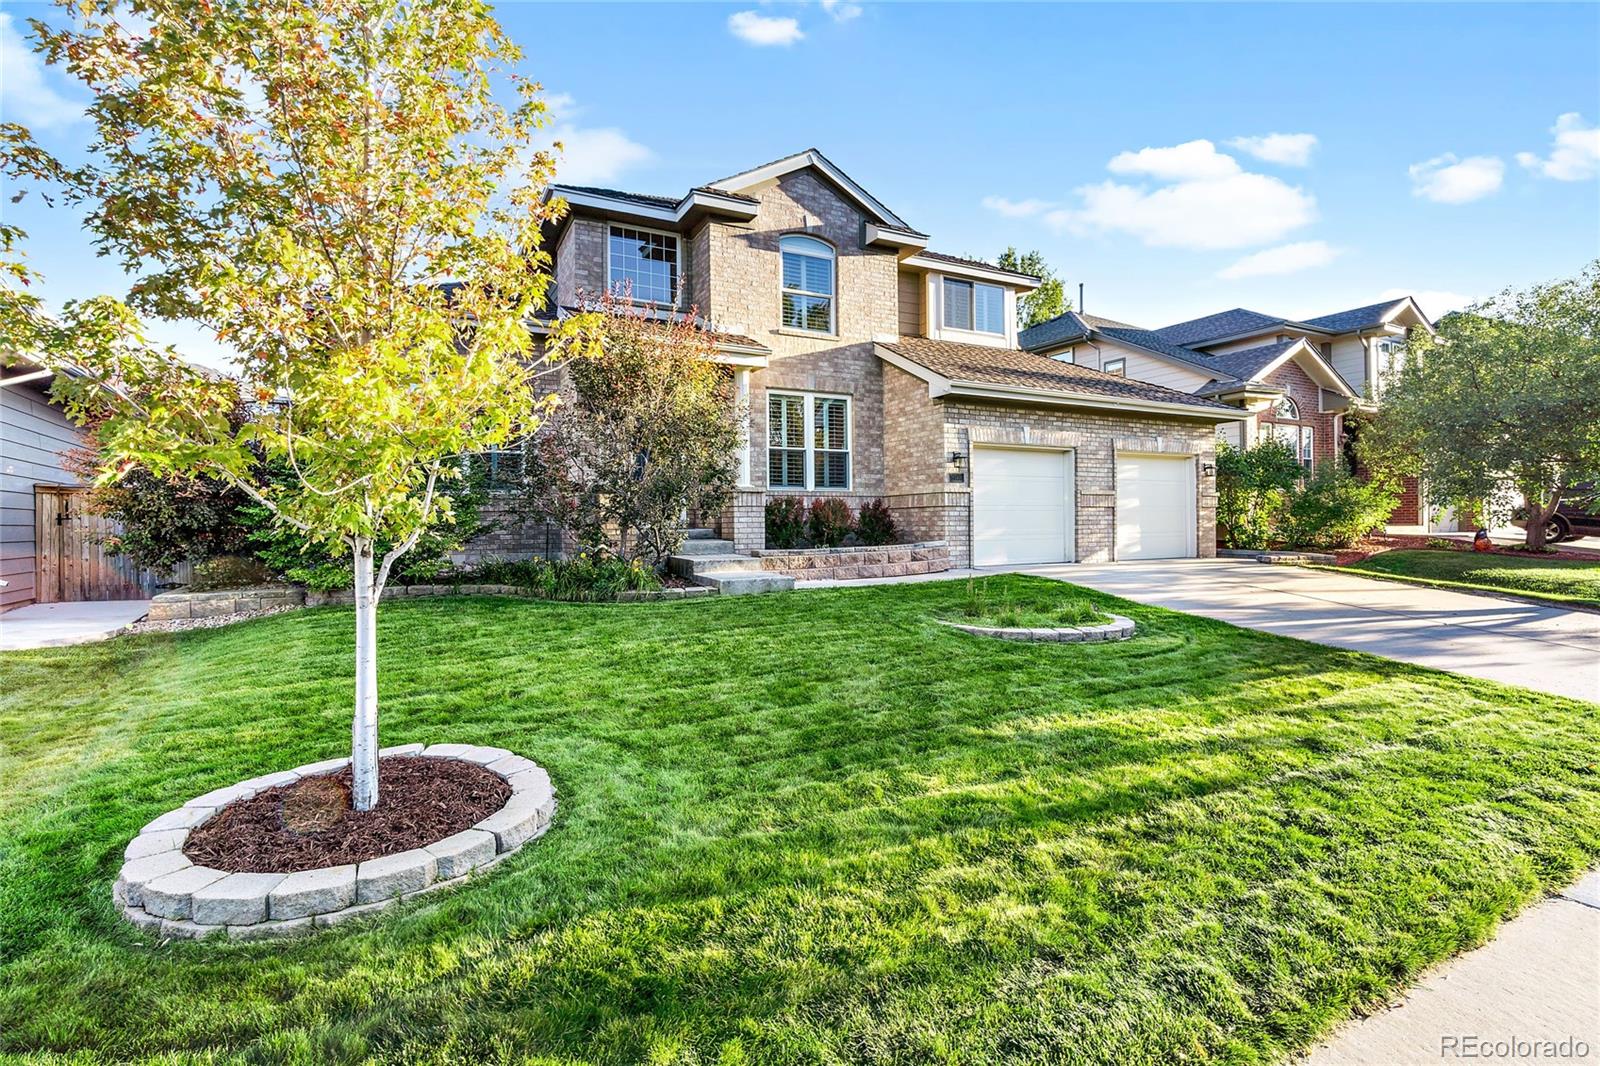 10430  stonewillow drive, Parker sold home. Closed on 2024-04-01 for $805,000.